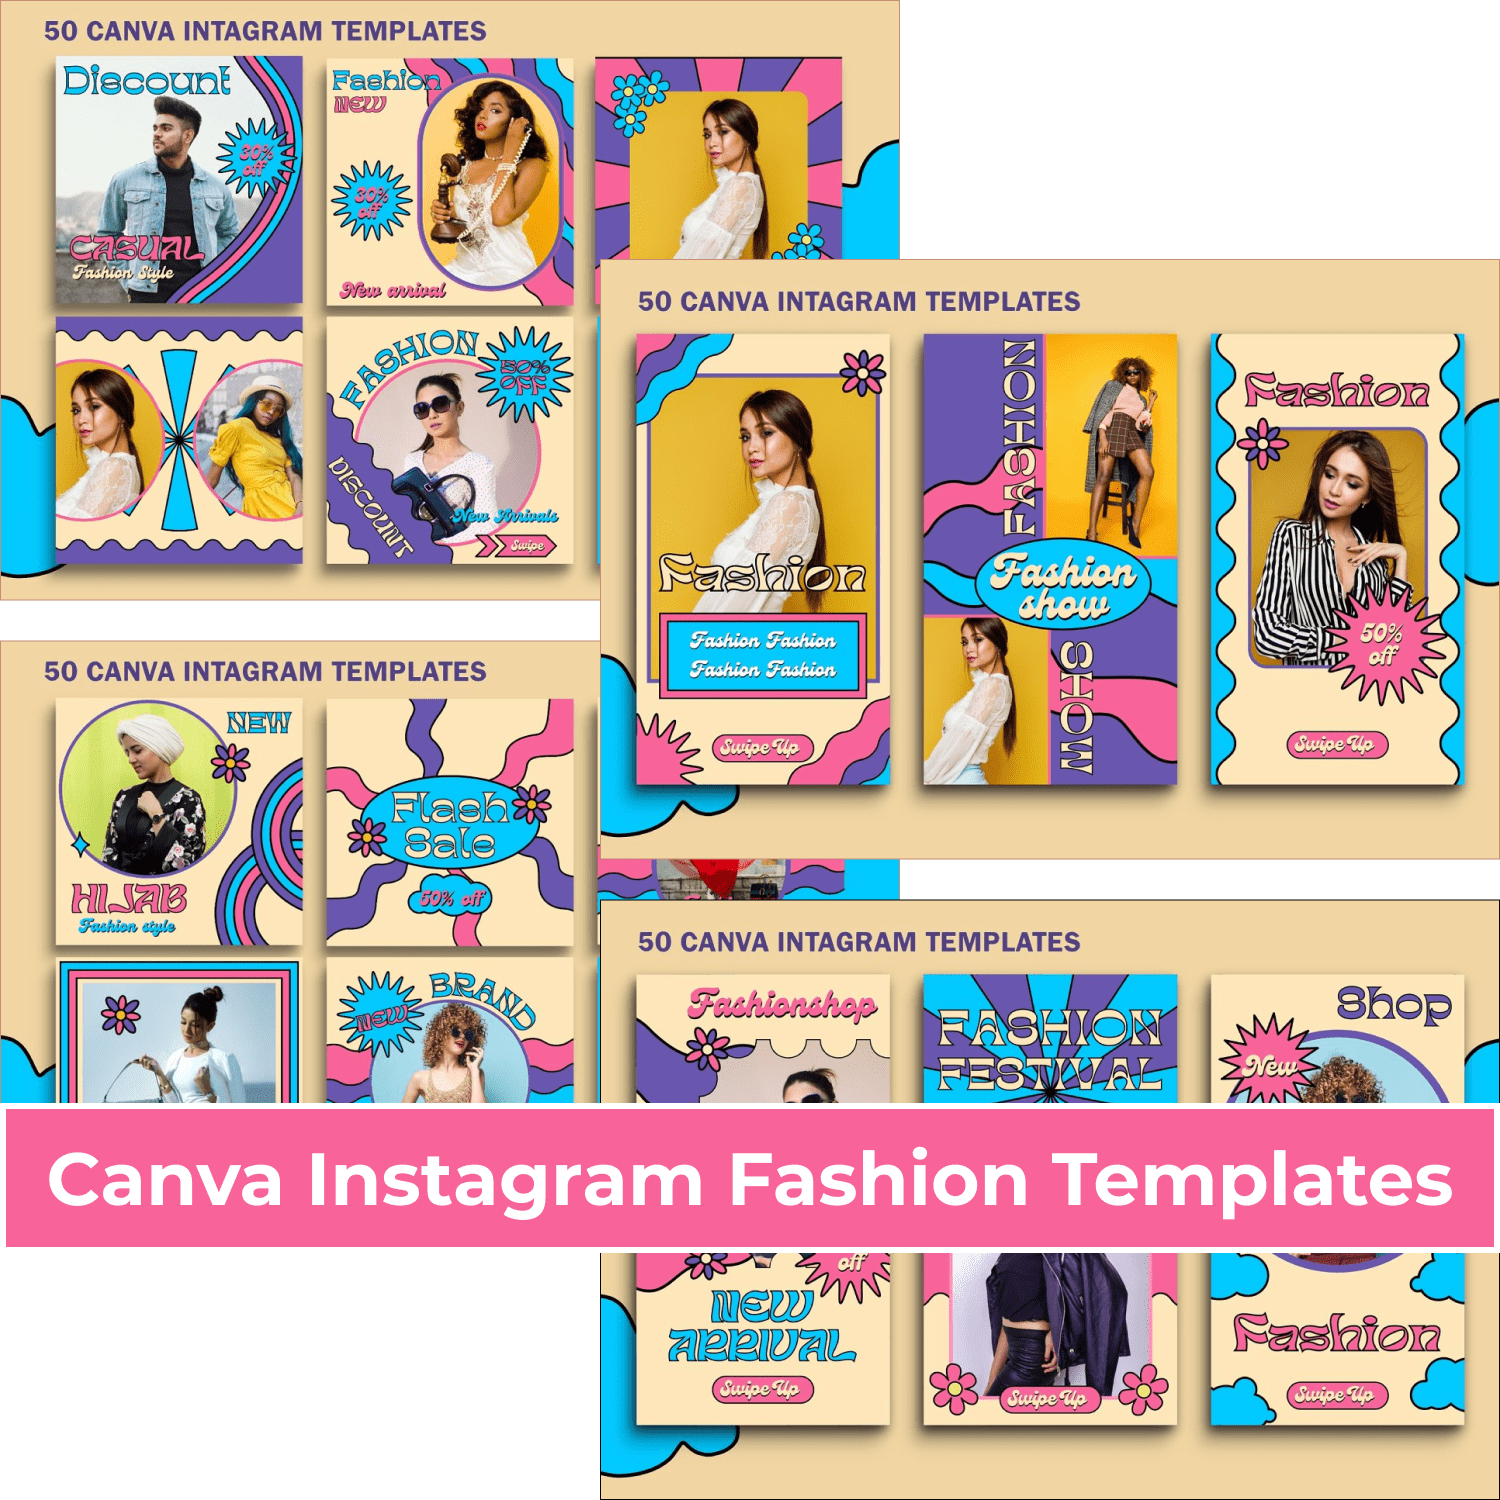 Canva Instagram Fashion Templates cover image.